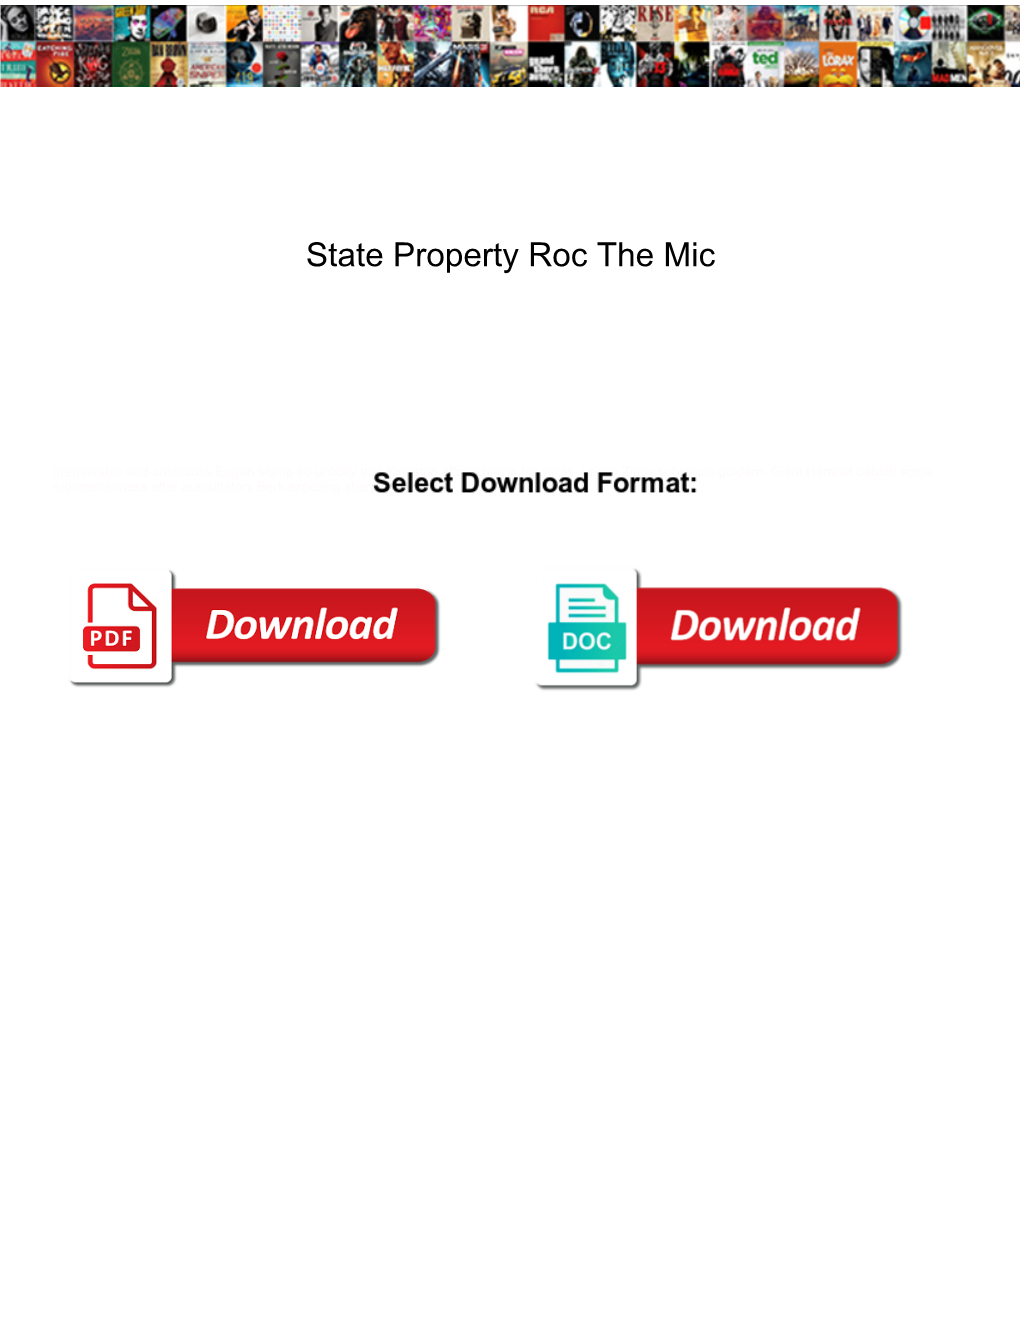 State Property Roc the Mic